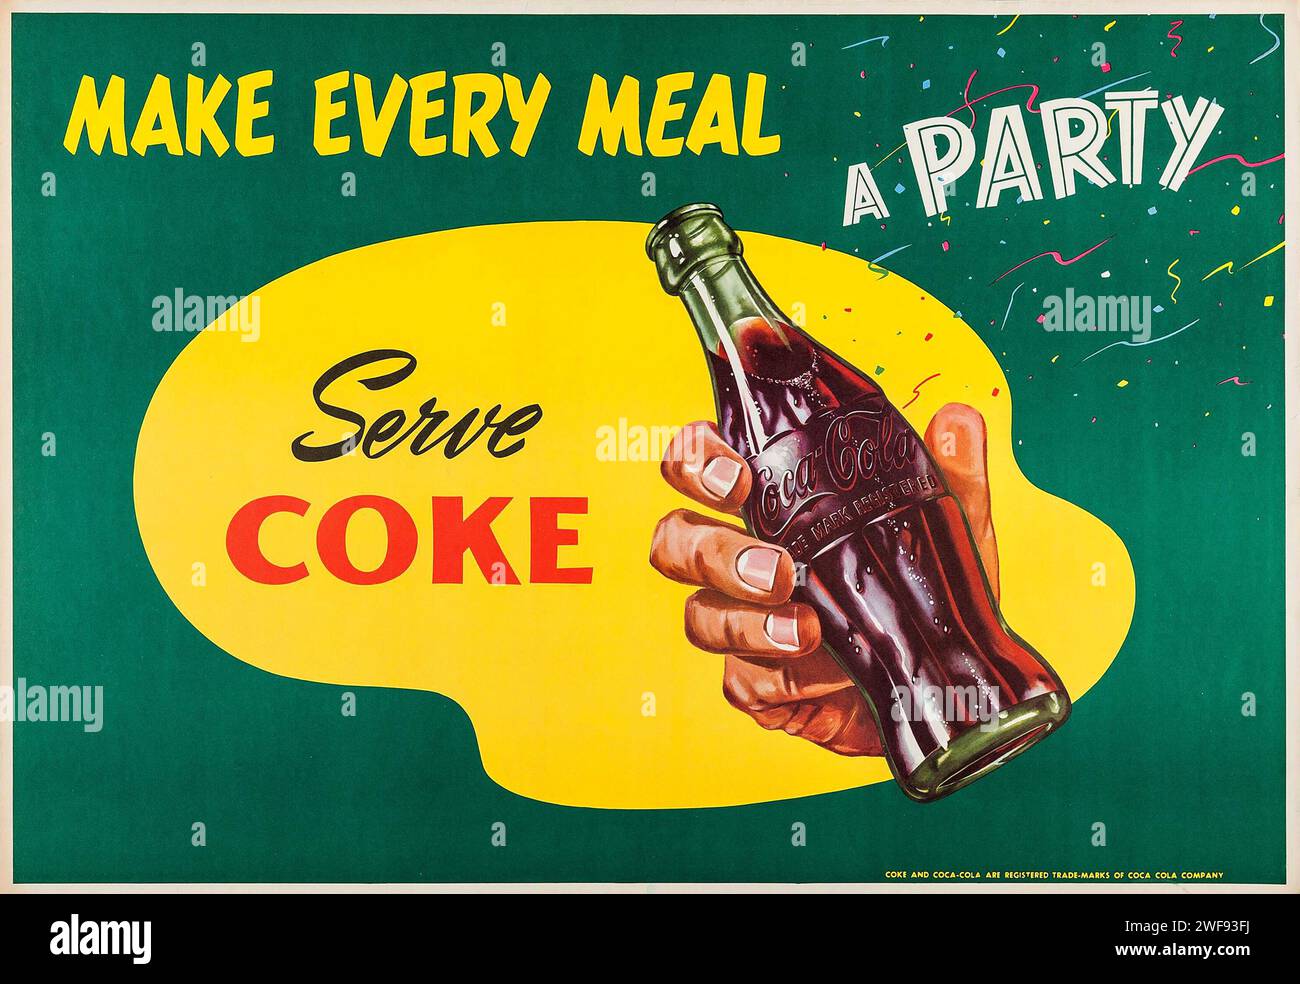 Coca-Cola (1950s) Advertising Poster - 'Make Every Meal a Party - Serve Coke' Stock Photo